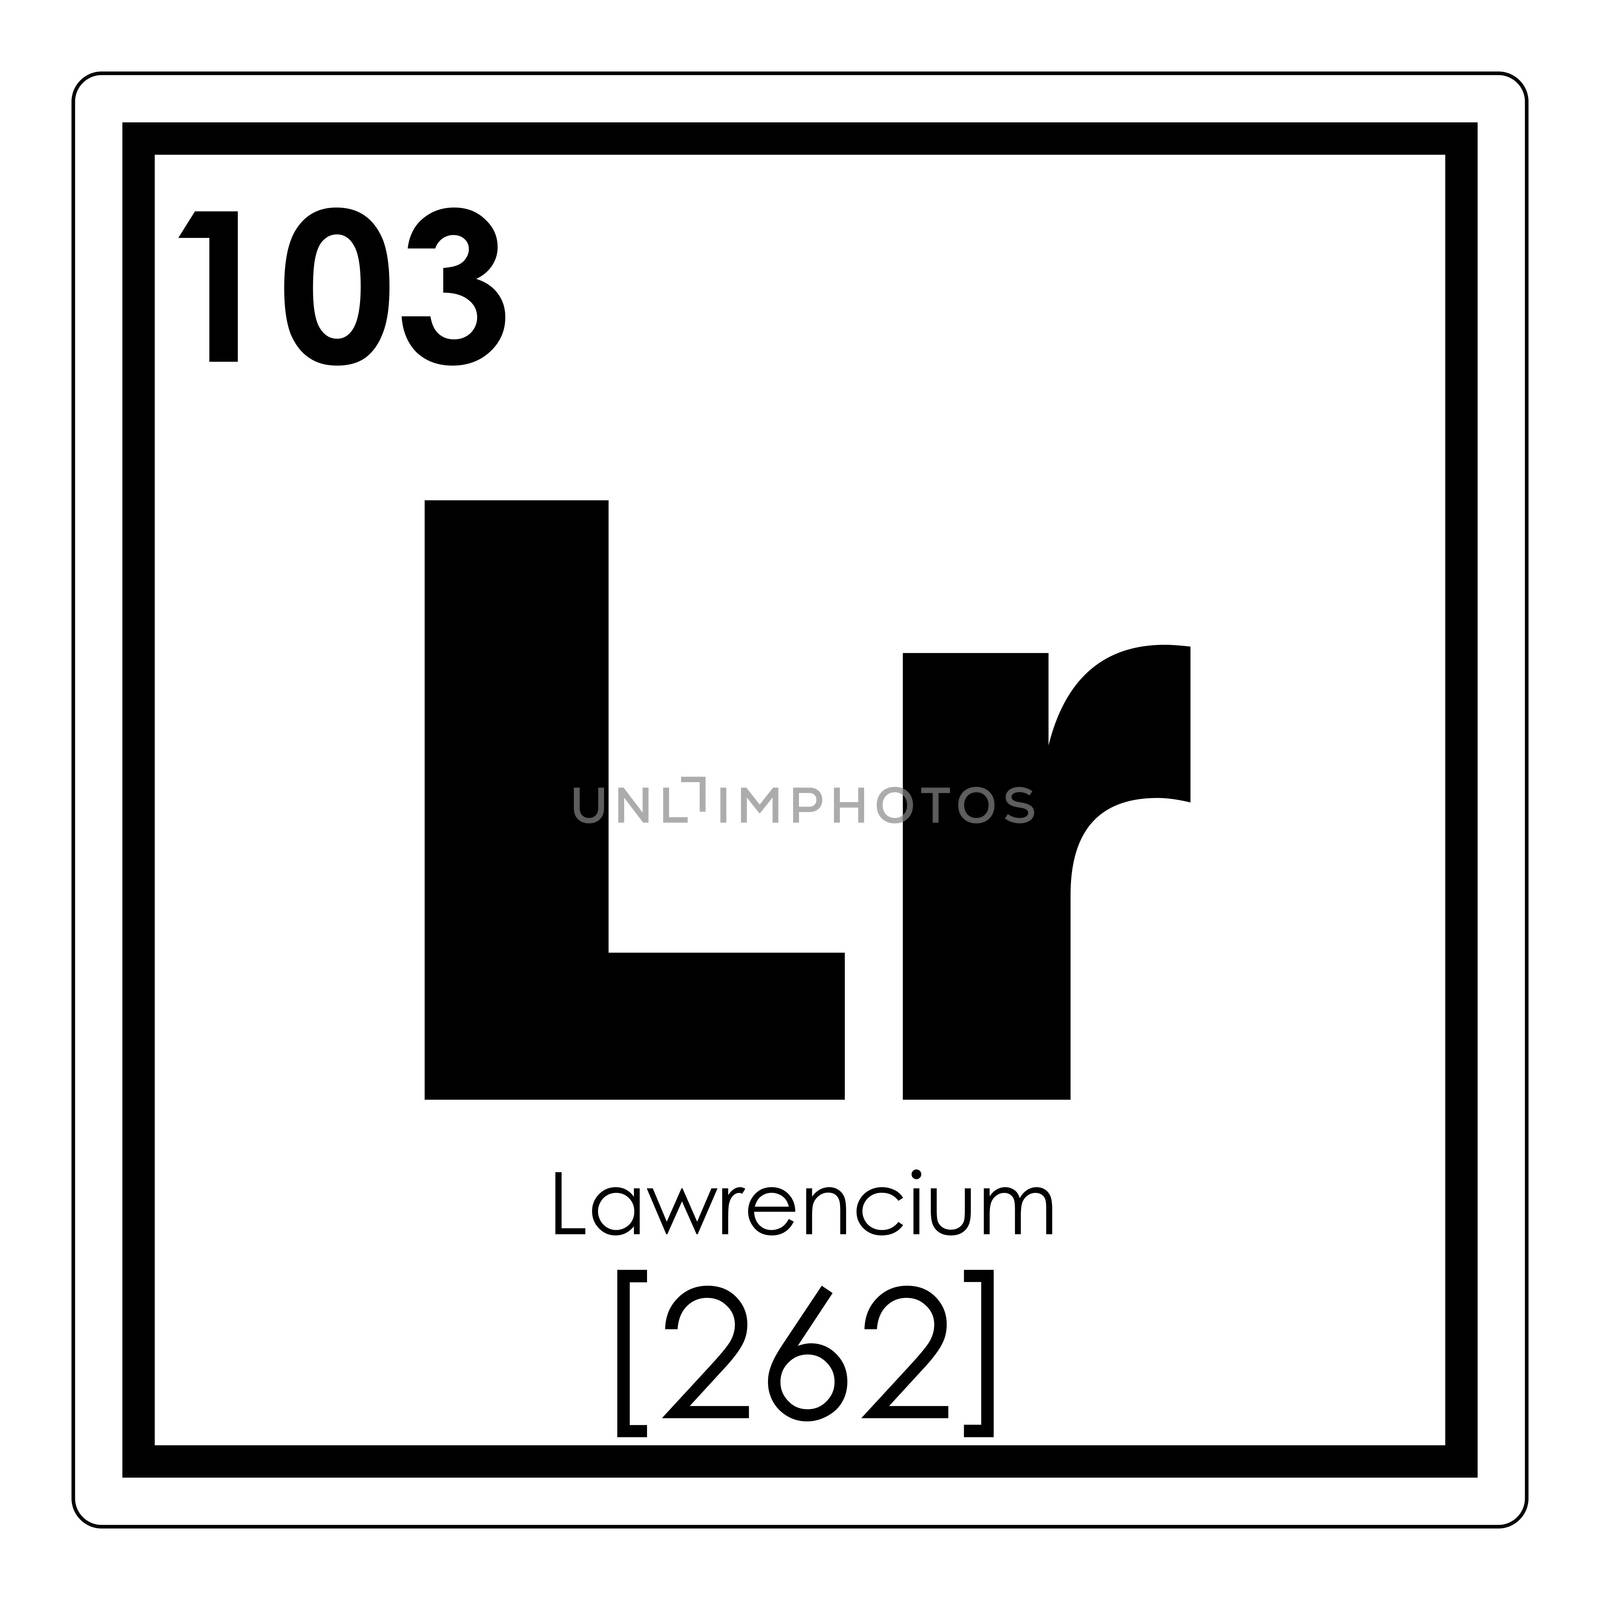 Lawrencium chemical element by tony4urban